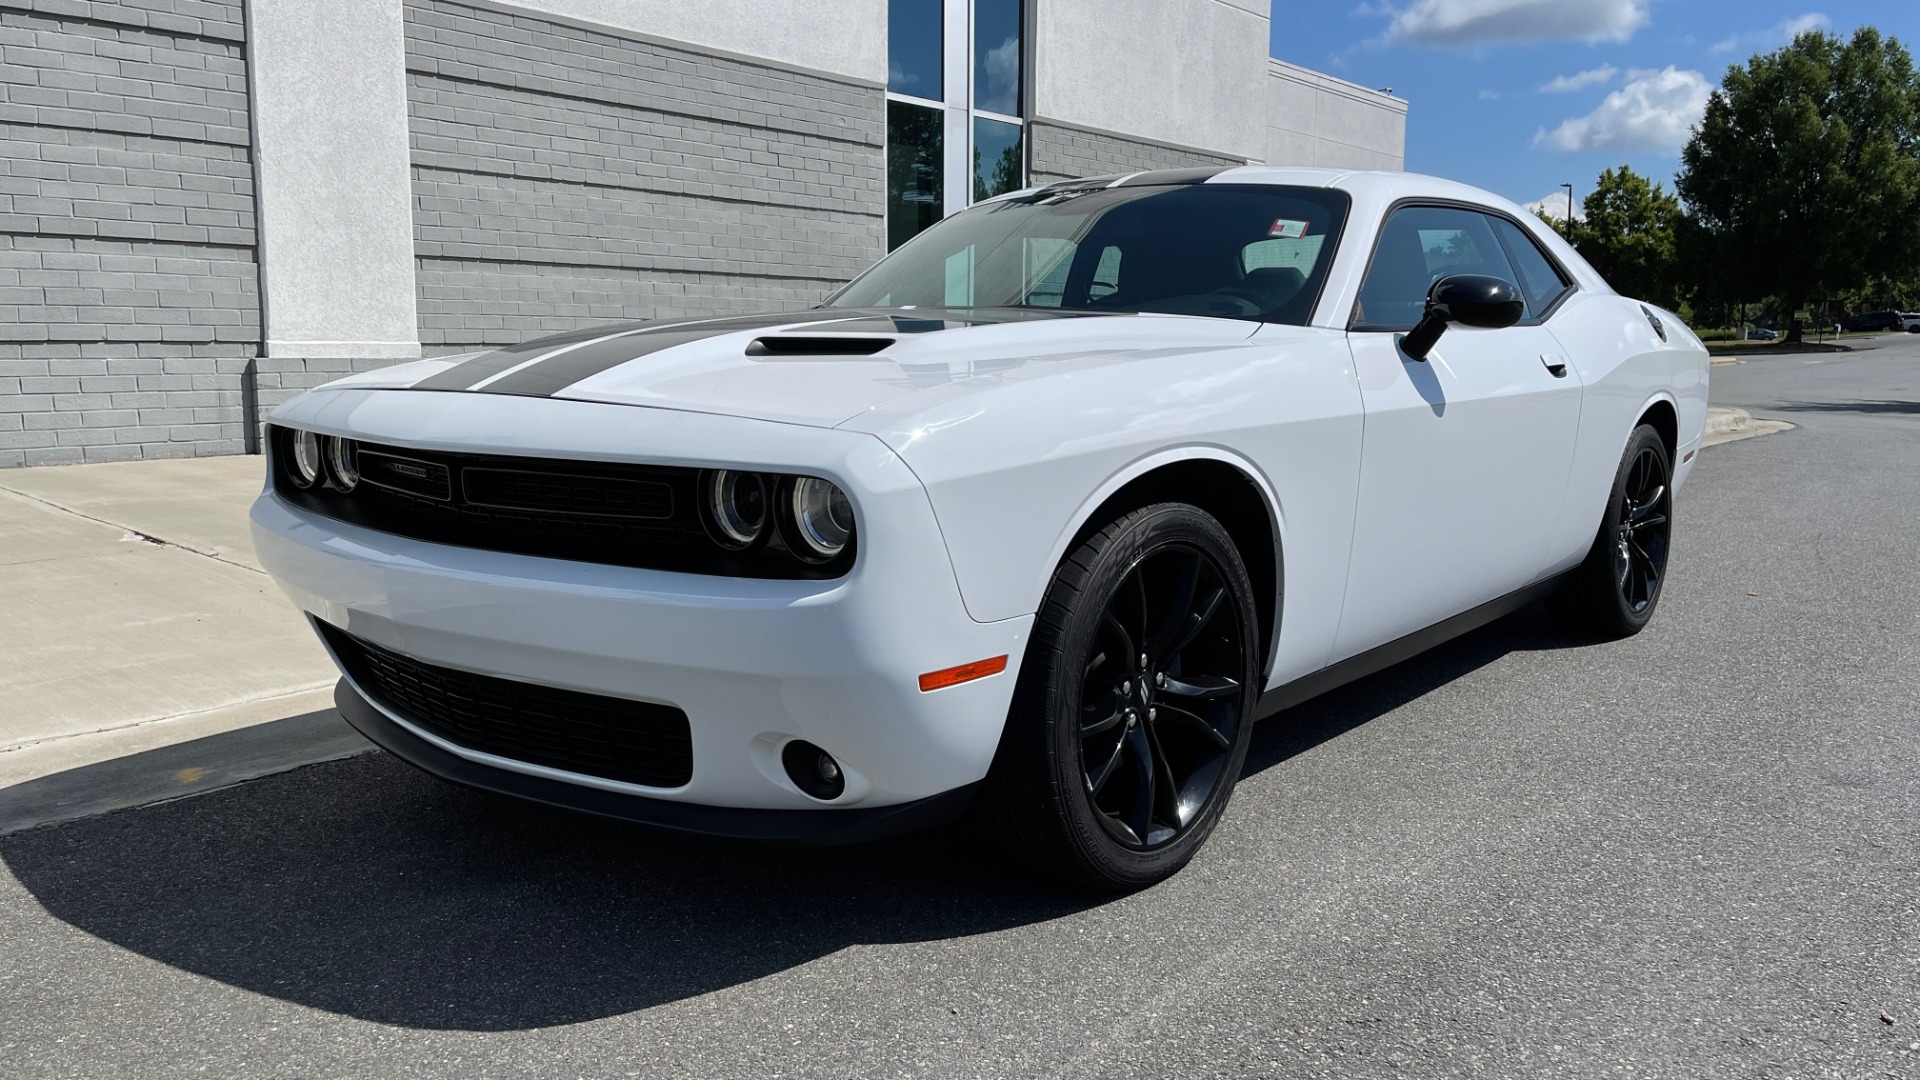 Used 2018 Dodge CHALLENGER SXT COUPE / BLACKTOP PKG / 3.6L V6 / 8-SPD AUTO / REARVIEW for sale Sold at Formula Imports in Charlotte NC 28227 3